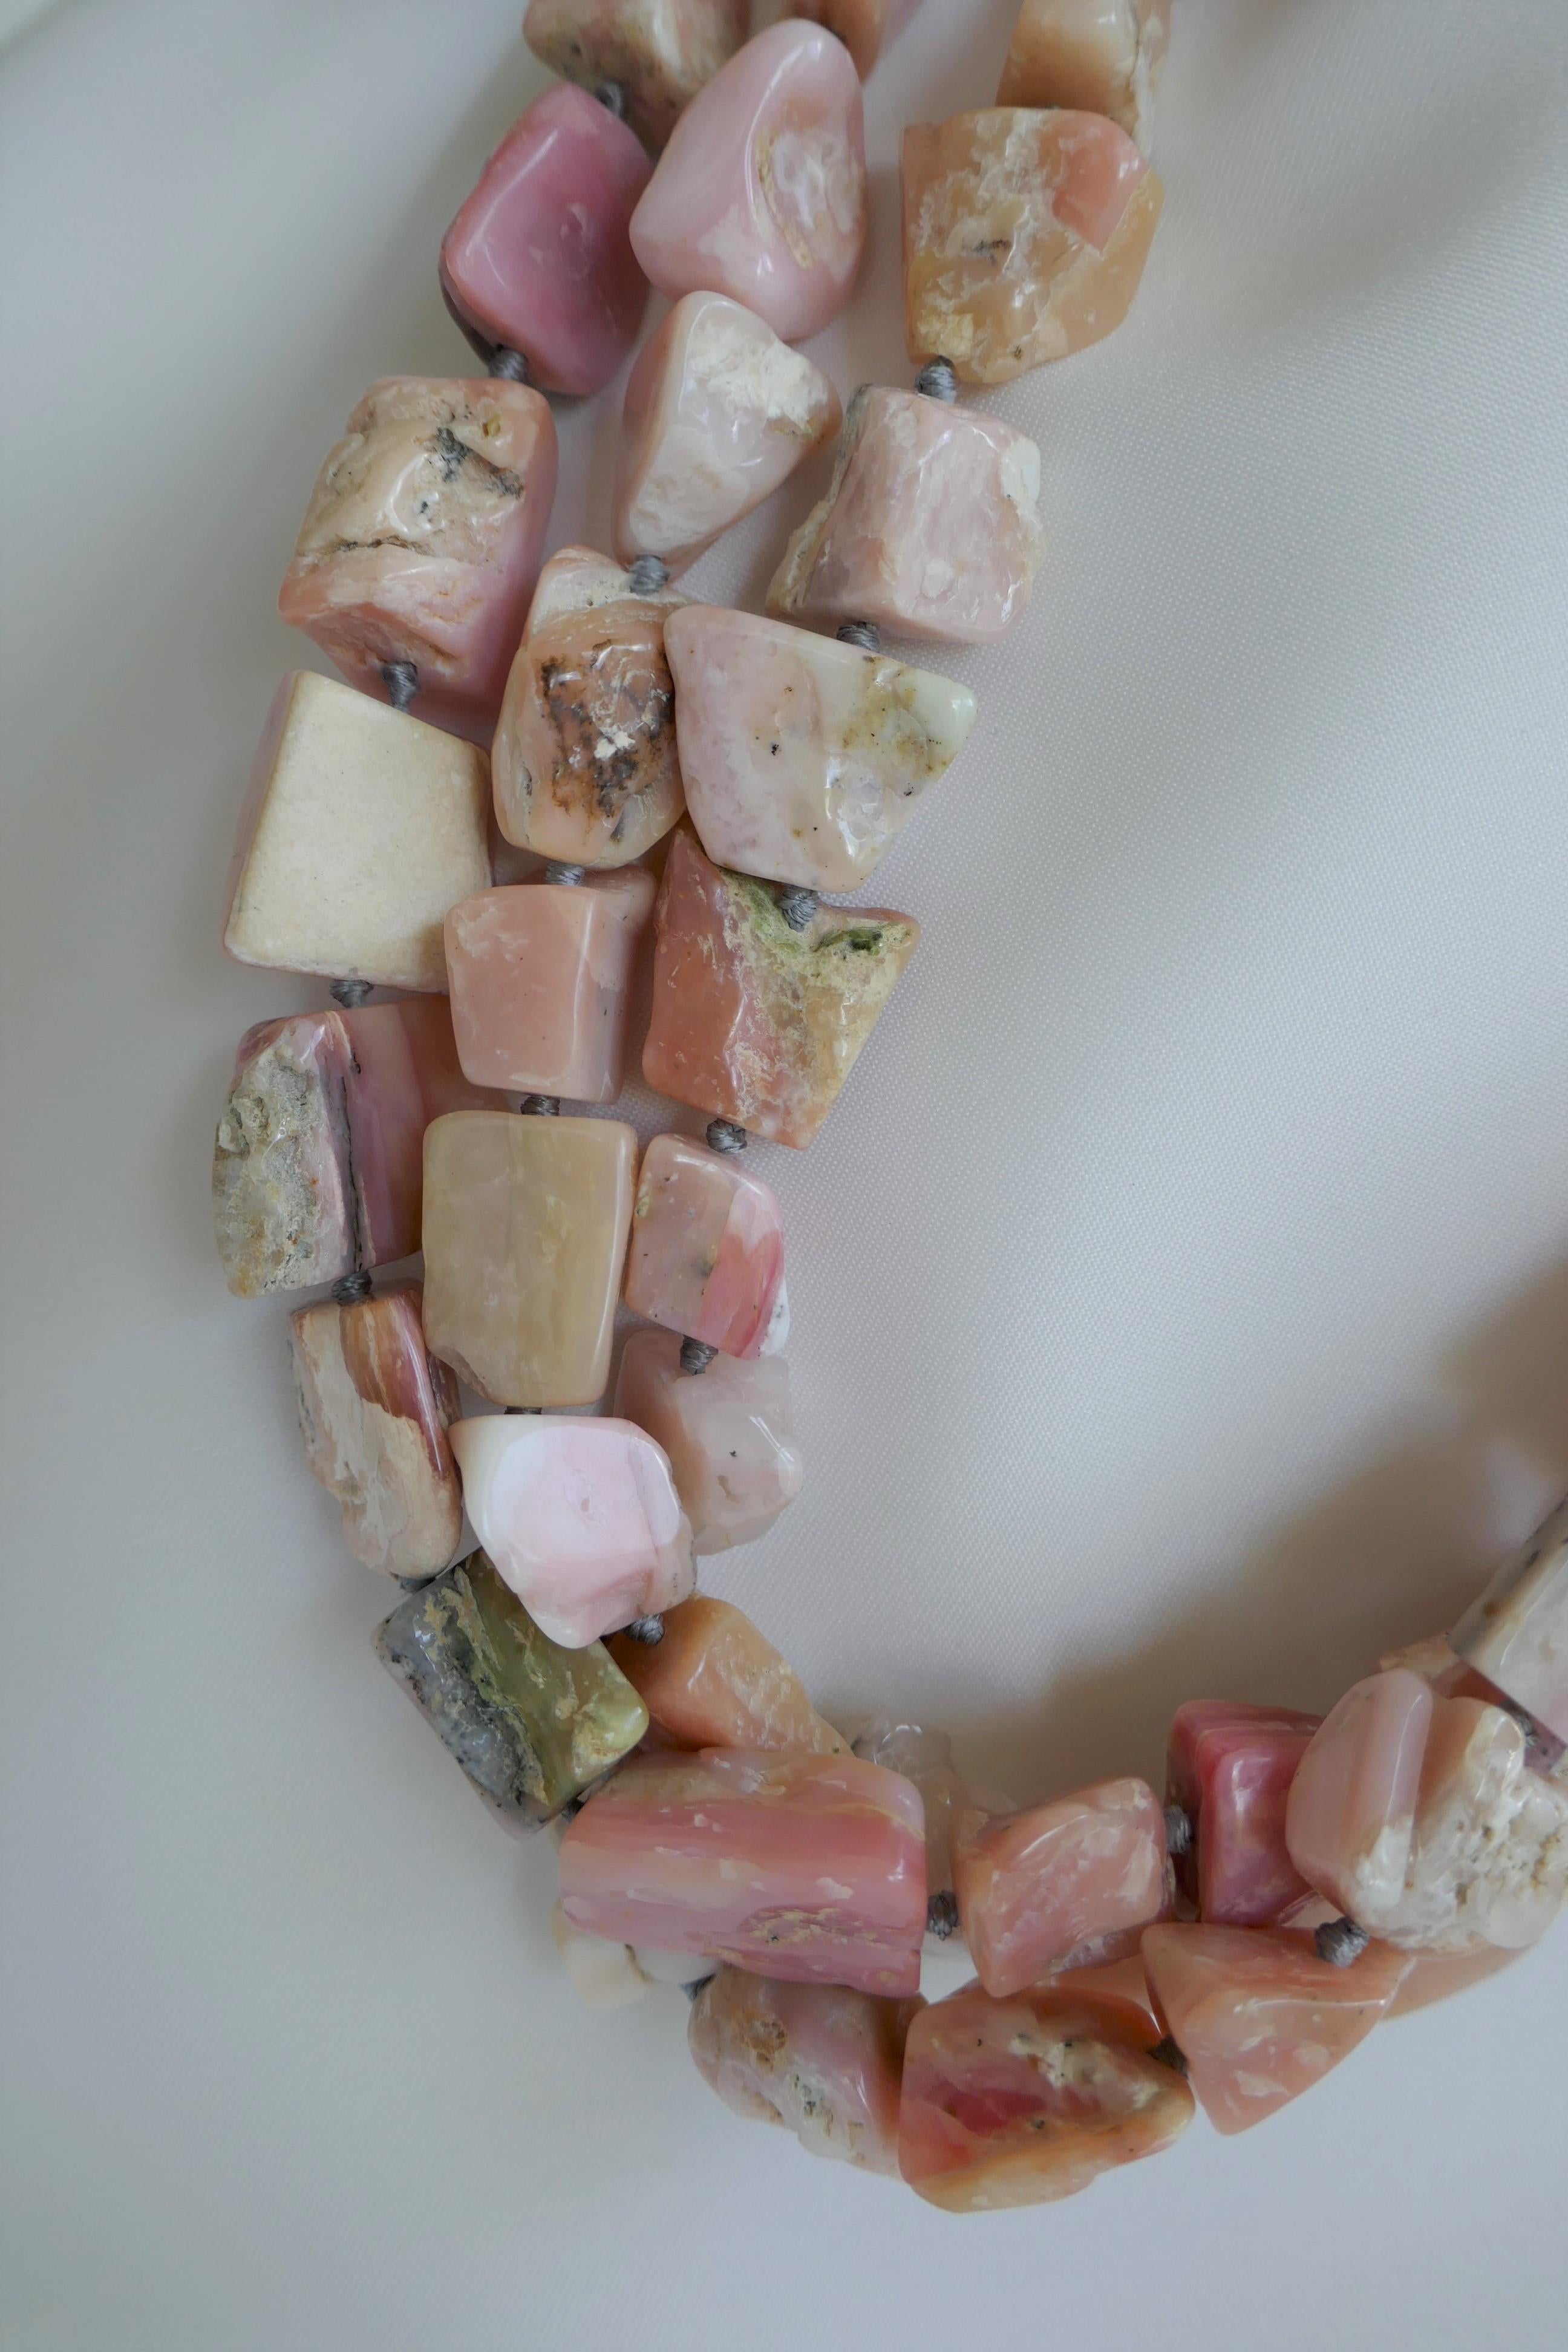 This necklace in one of a kind. It is definitely  a statement necklace that looks beautiful on.  The pink opal nuggets have a lot of different tonalities. The necklace is three strands and is individually knotted on grey silk thread. The nuggets are